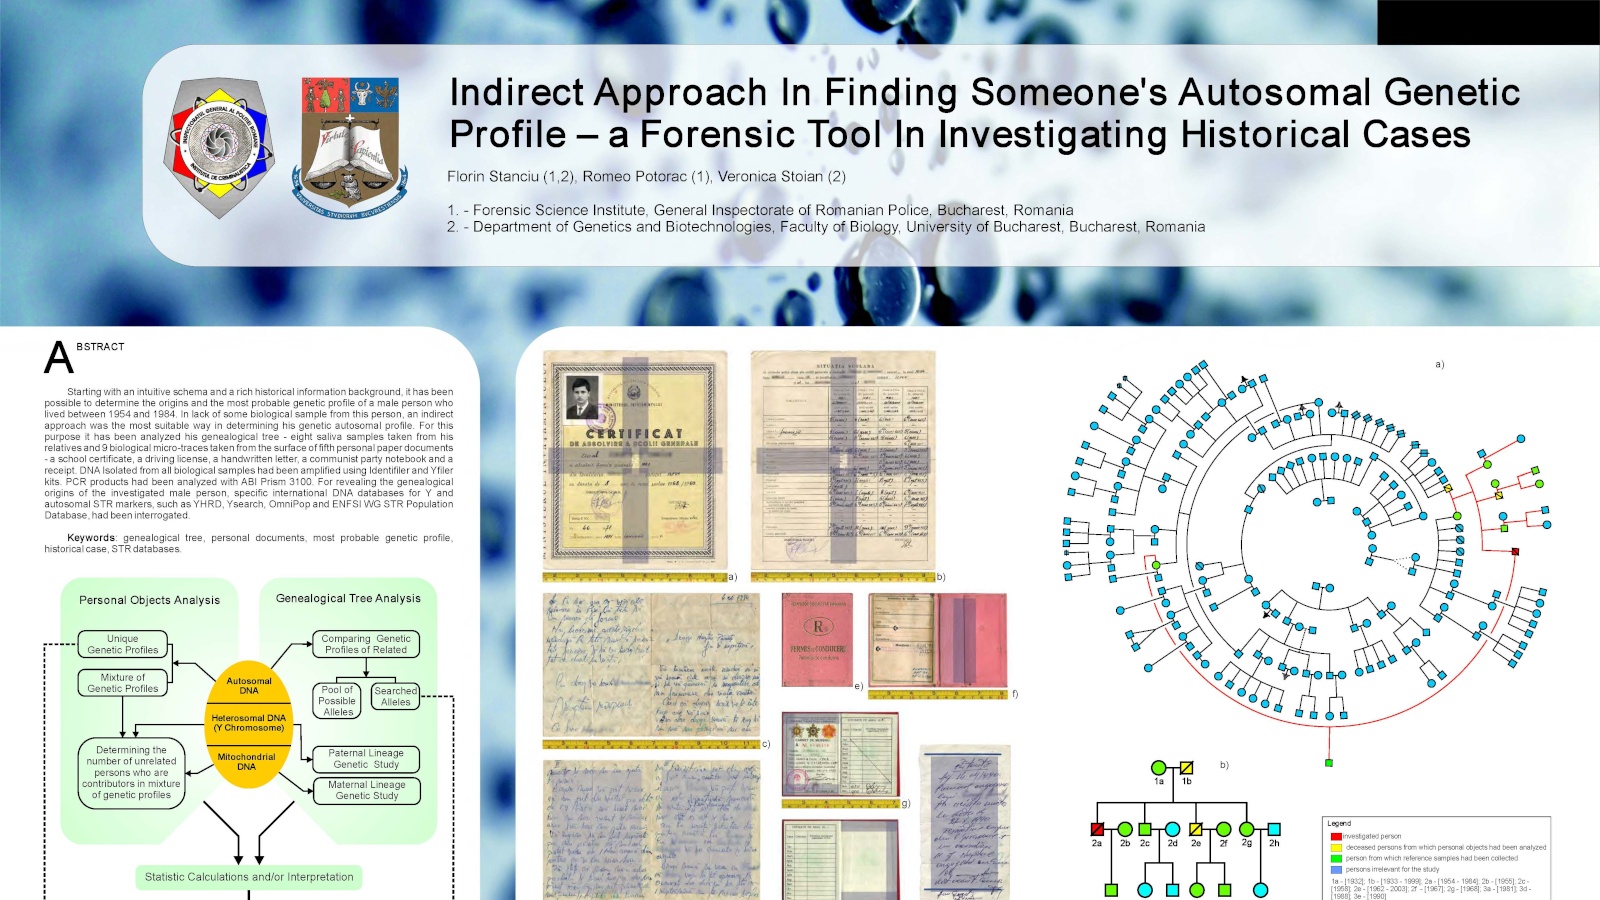 Indirect approach in finding someone’s autosomal genetic profile – a forensic tool in investigating historical cases